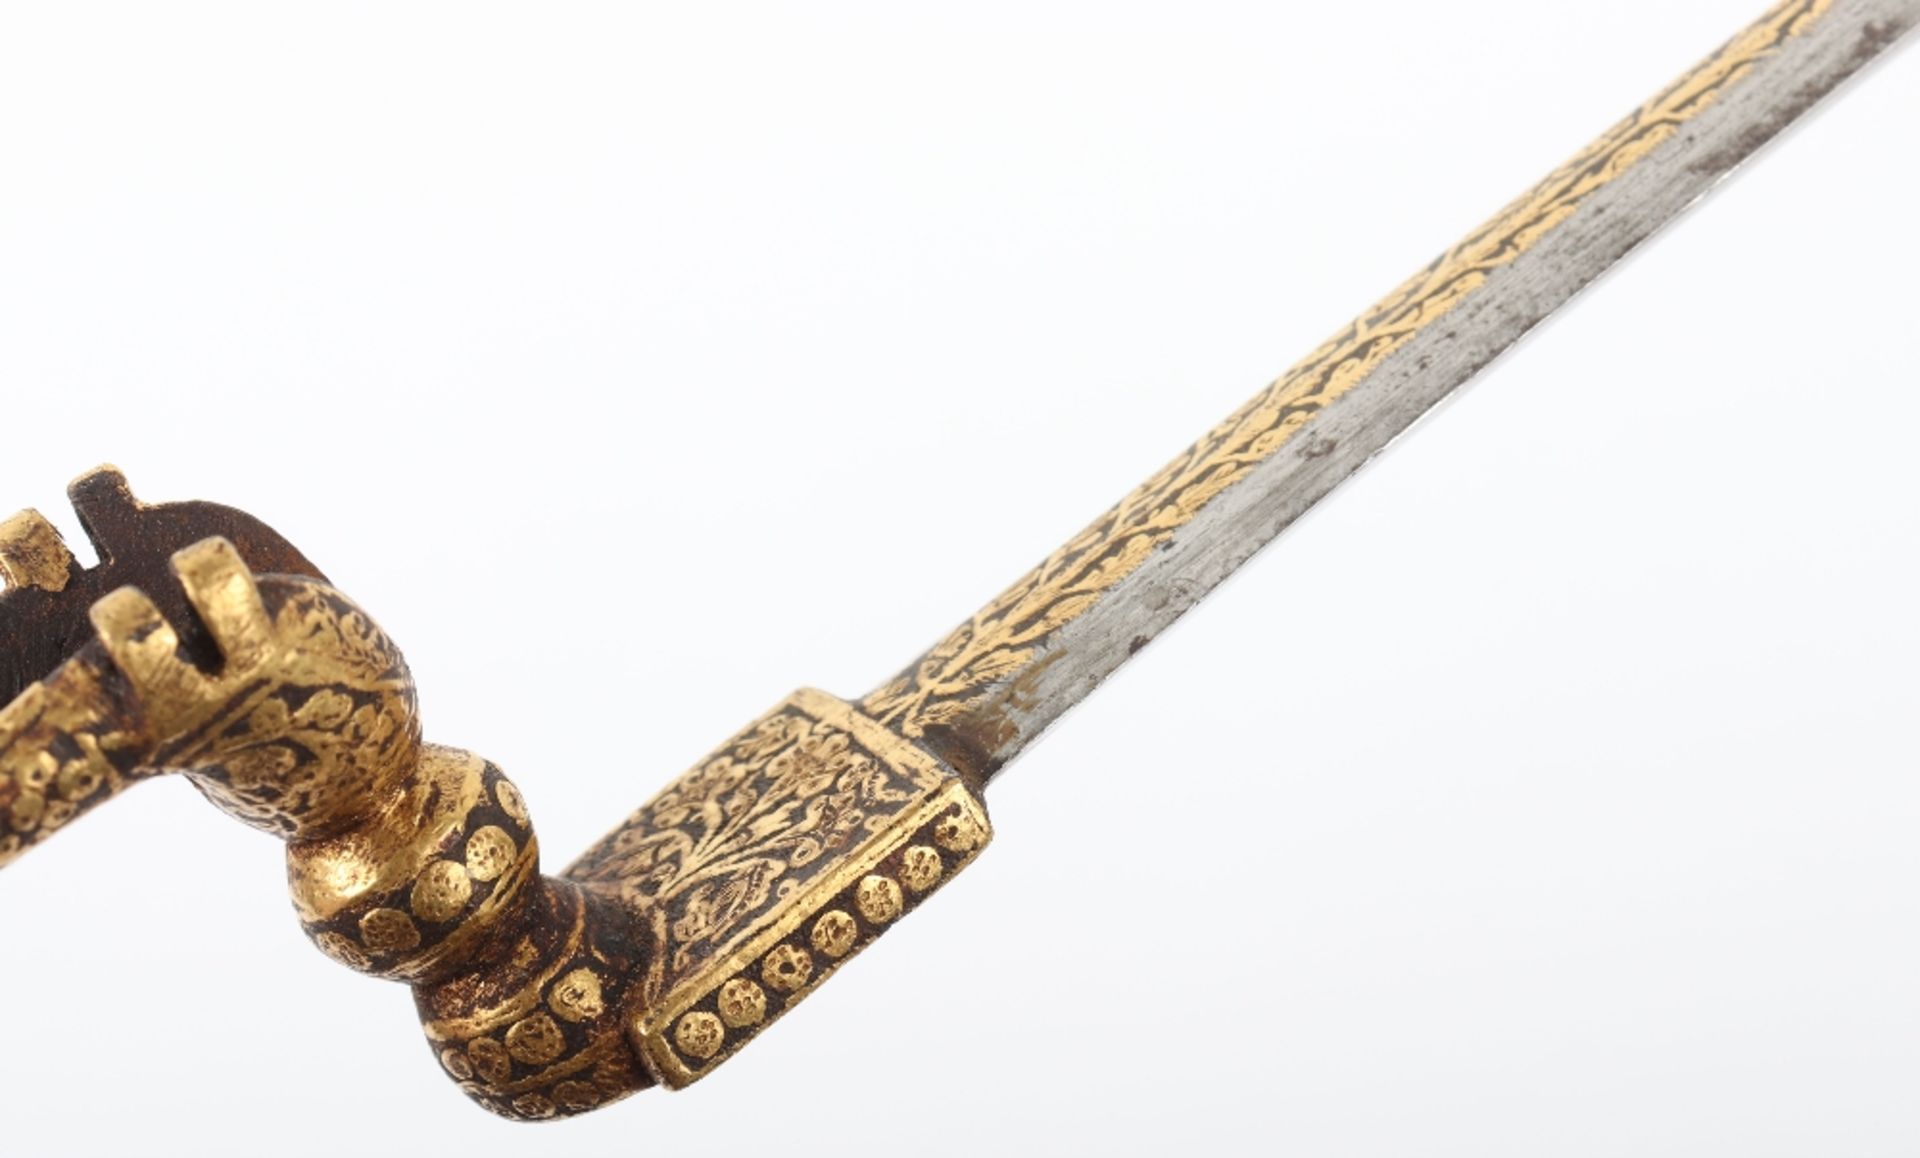 Rare Indian Bayonet Sangin Intended to be Bound to a Matchlock Gun Torador, 18th or 19th Century - Image 15 of 16